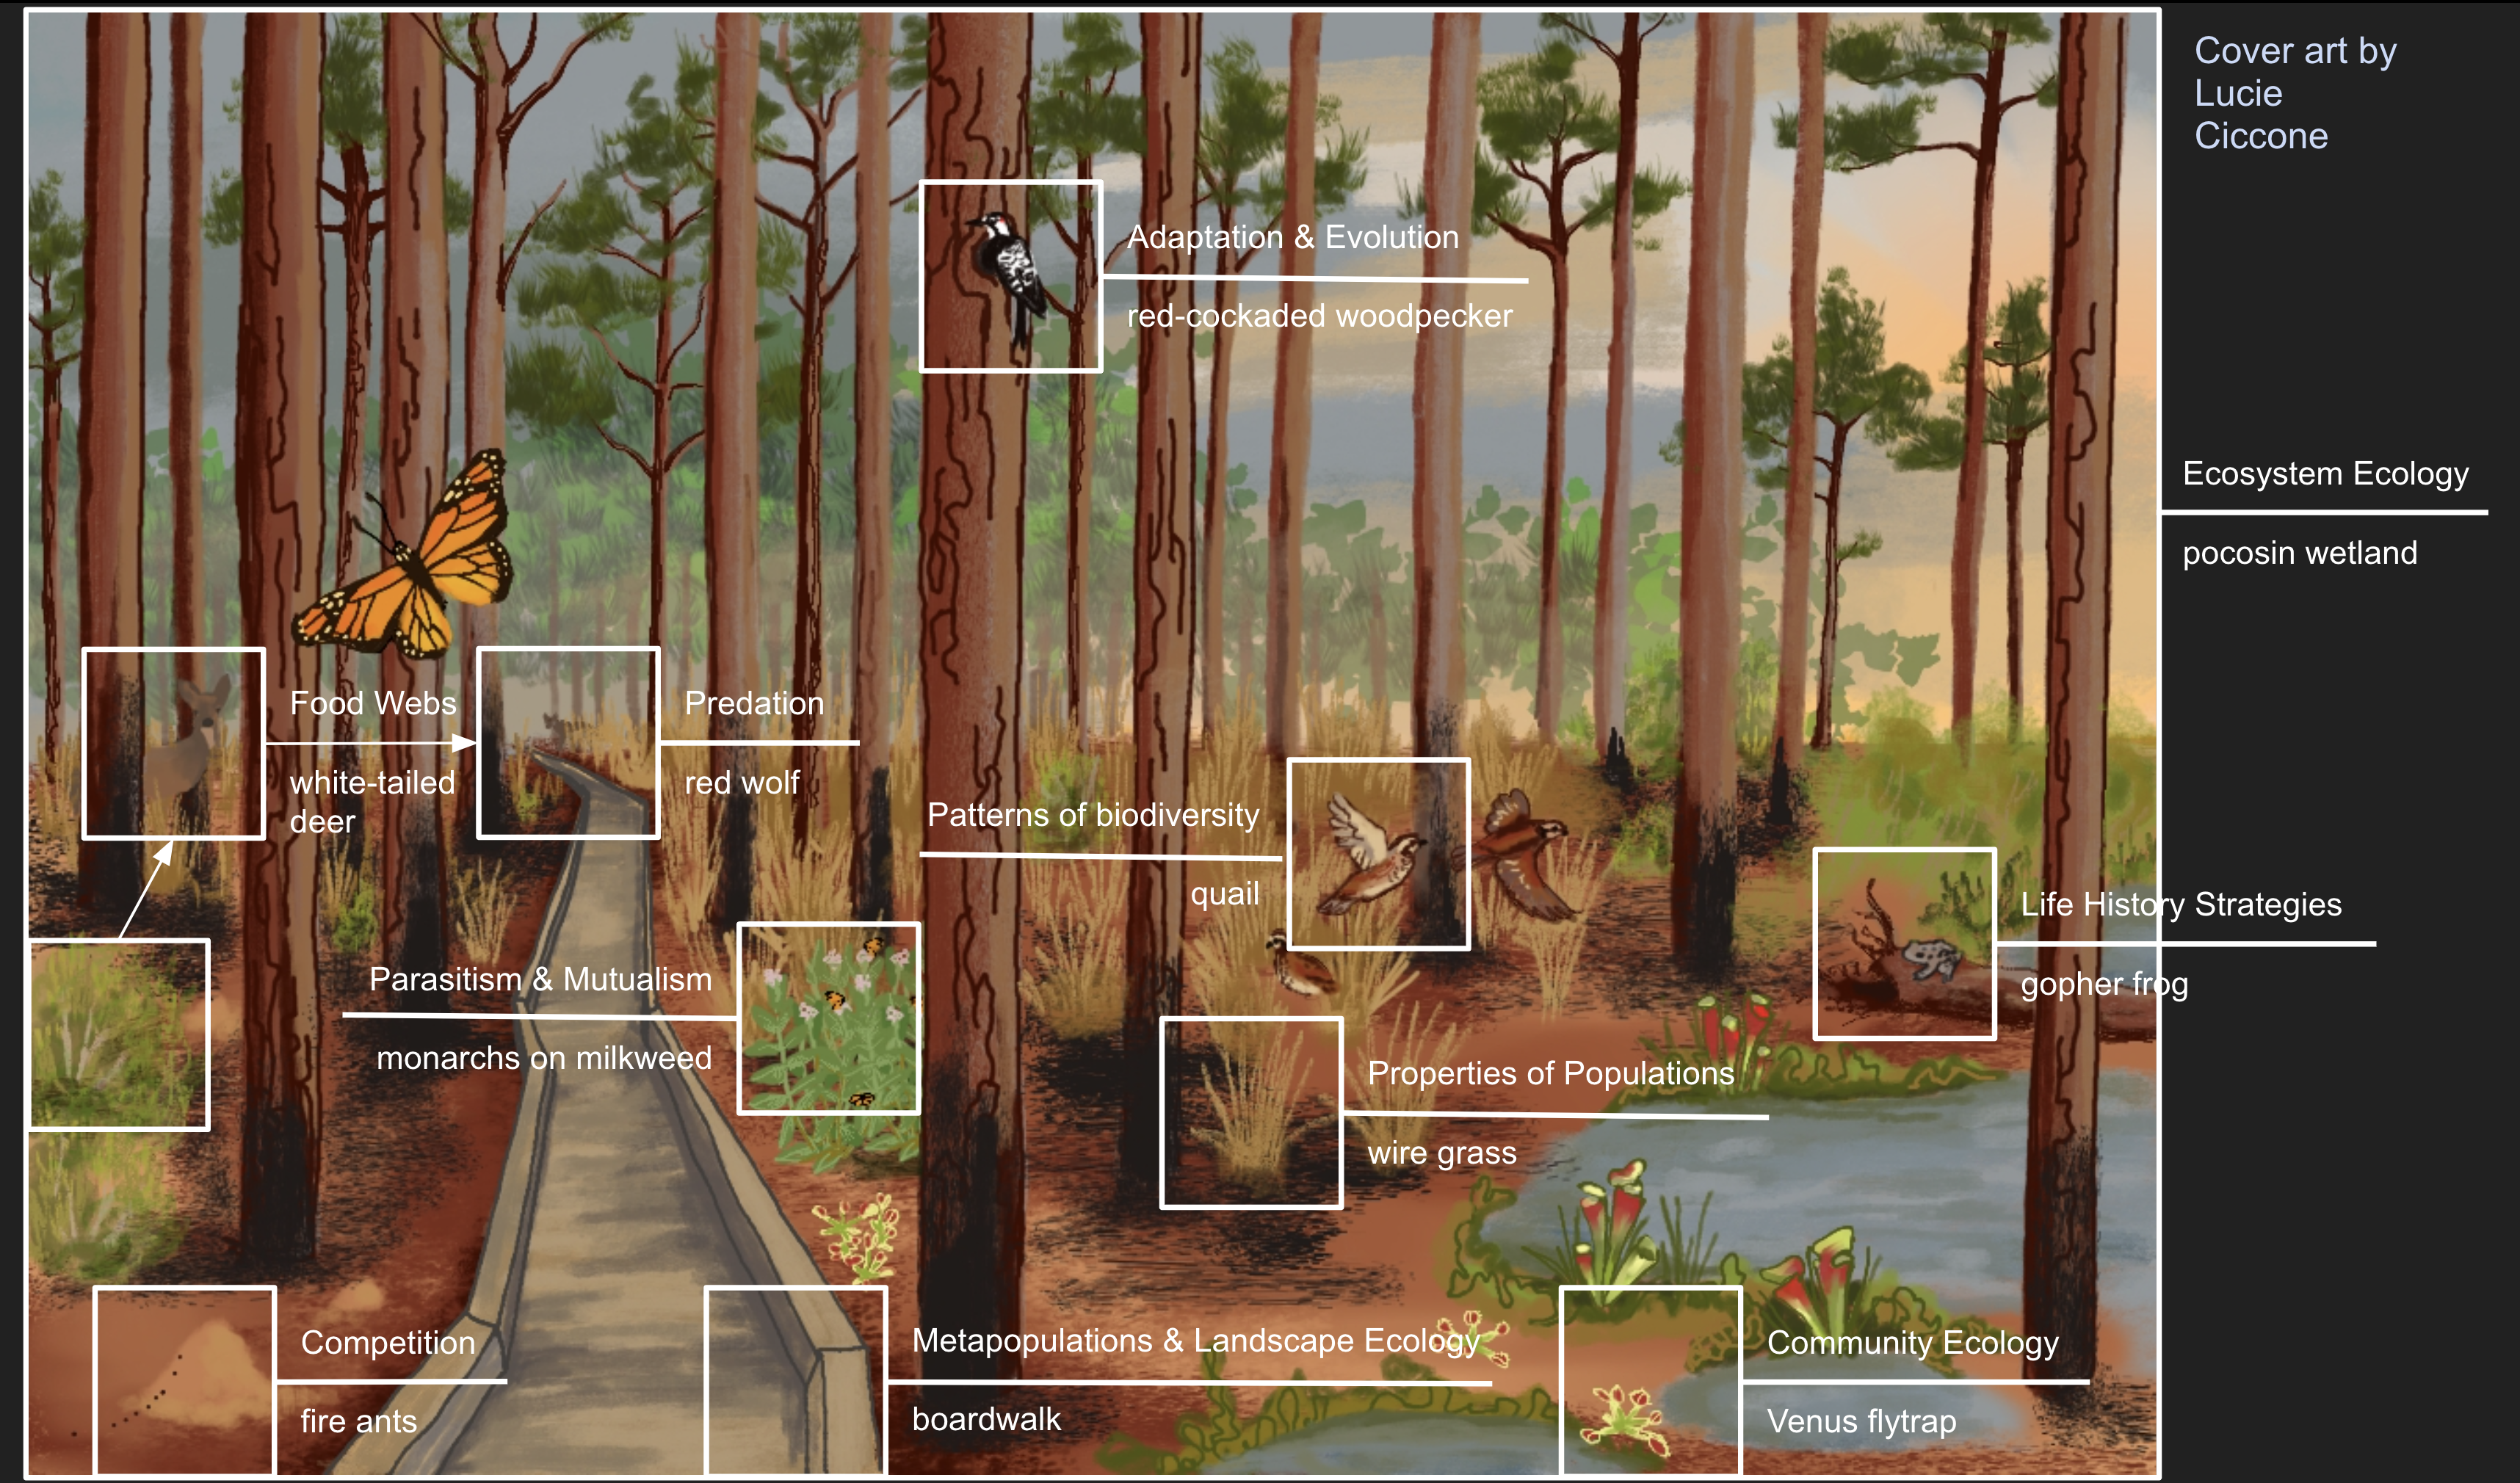 Digital illustration of a longleaf pine and pocosin landscape. Running through the forest is a boardwalk, and throughout the landscape are species associated with longleaf pine forest and pocosin ecosystems, including wiregrass, bayberry, red-cockaded woodpeckers, northern bobwhites, venus flytraps, pitcher plants, gopher frogs, milkweed, and monarch butterflies. The bases of many of the trees are burnt, and the ground bears the mark of fire. The rising sun can be seen through the trees and morning haze. The original image has been annotated with square outlines and labels to indicate which illustrated concept represents each chapter.